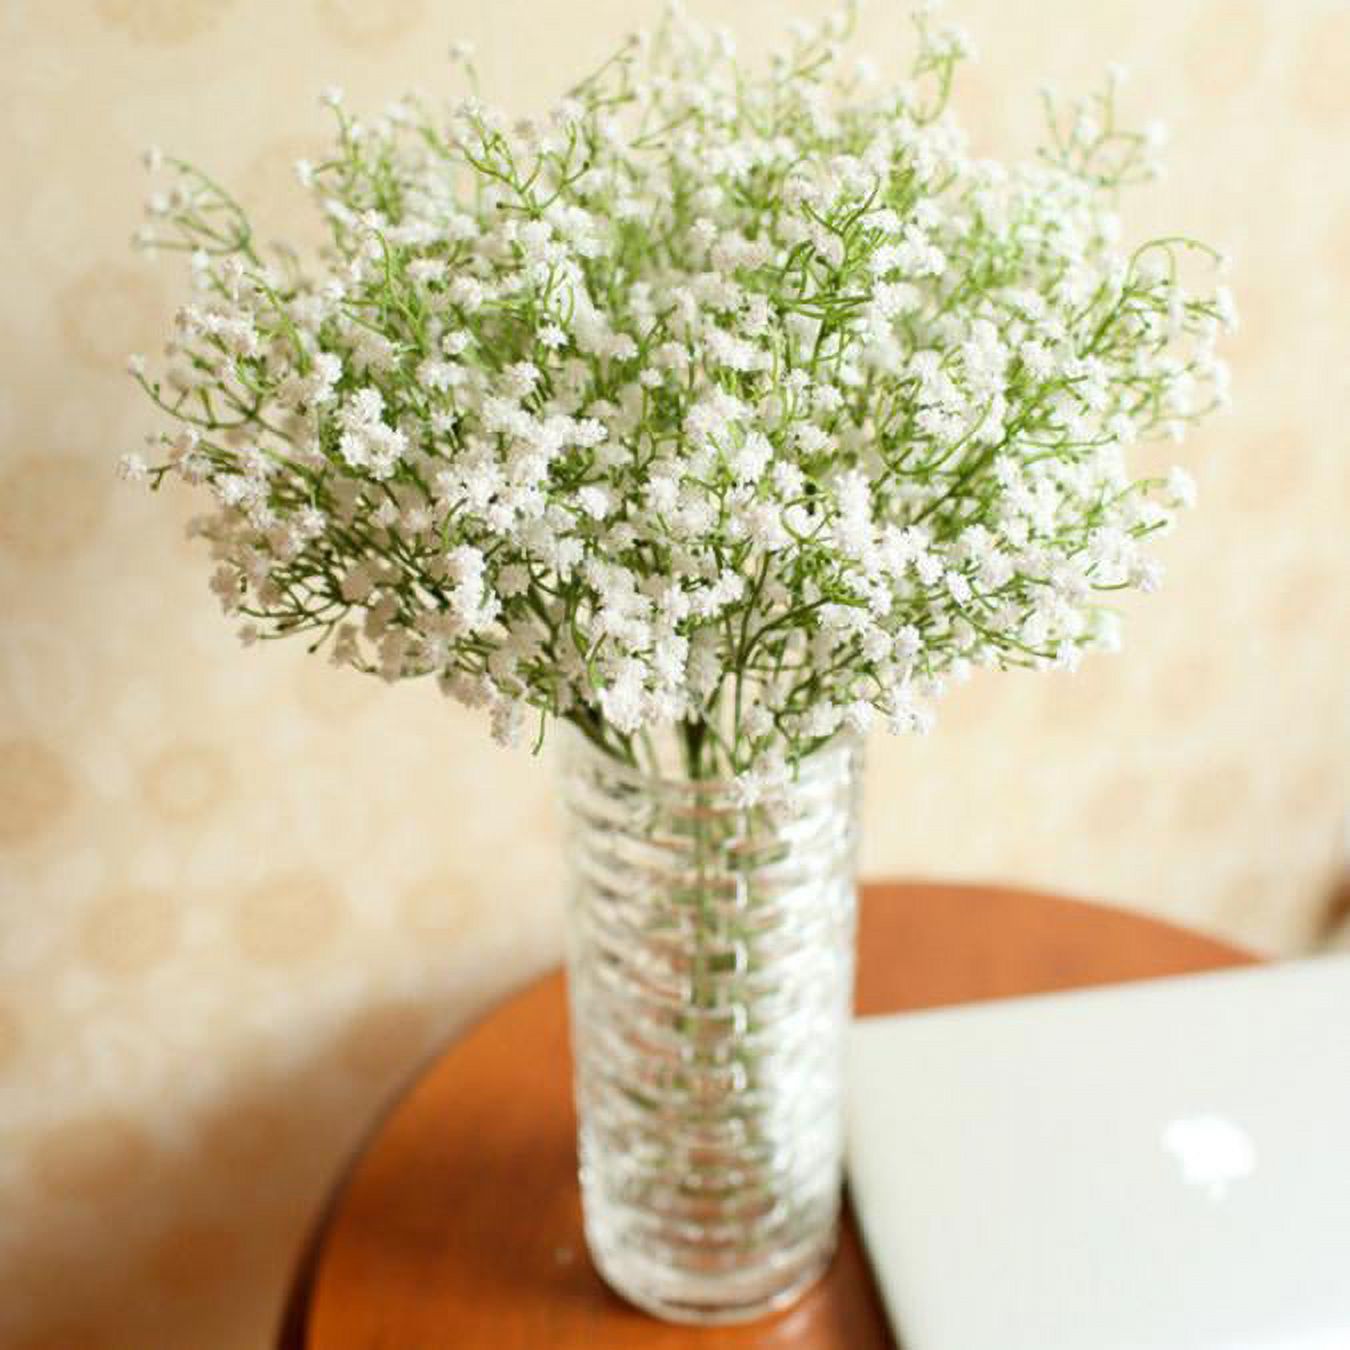 SDJMa Artificial Baby Breath Gypsophila Flowers Bouquets Real Touch Flowers for Wedding Party DIY Wreath Floral Arrangement Home Decoration (White) - image 4 of 9